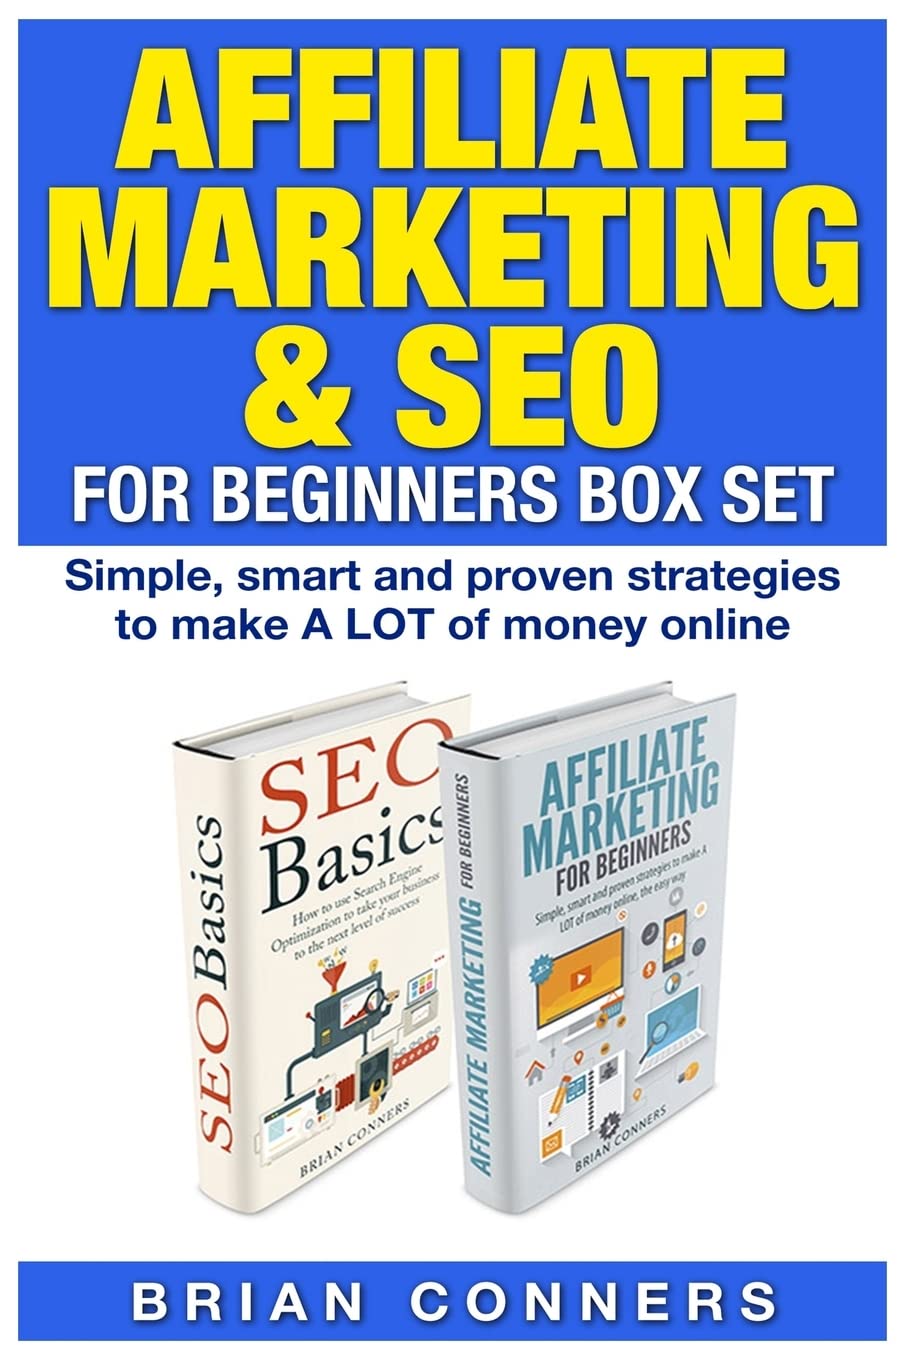 Affiliate Marketing & SEO for Beginners Box Set Simple, smart and proven strategies to make A LOT of money online - SureShot Books